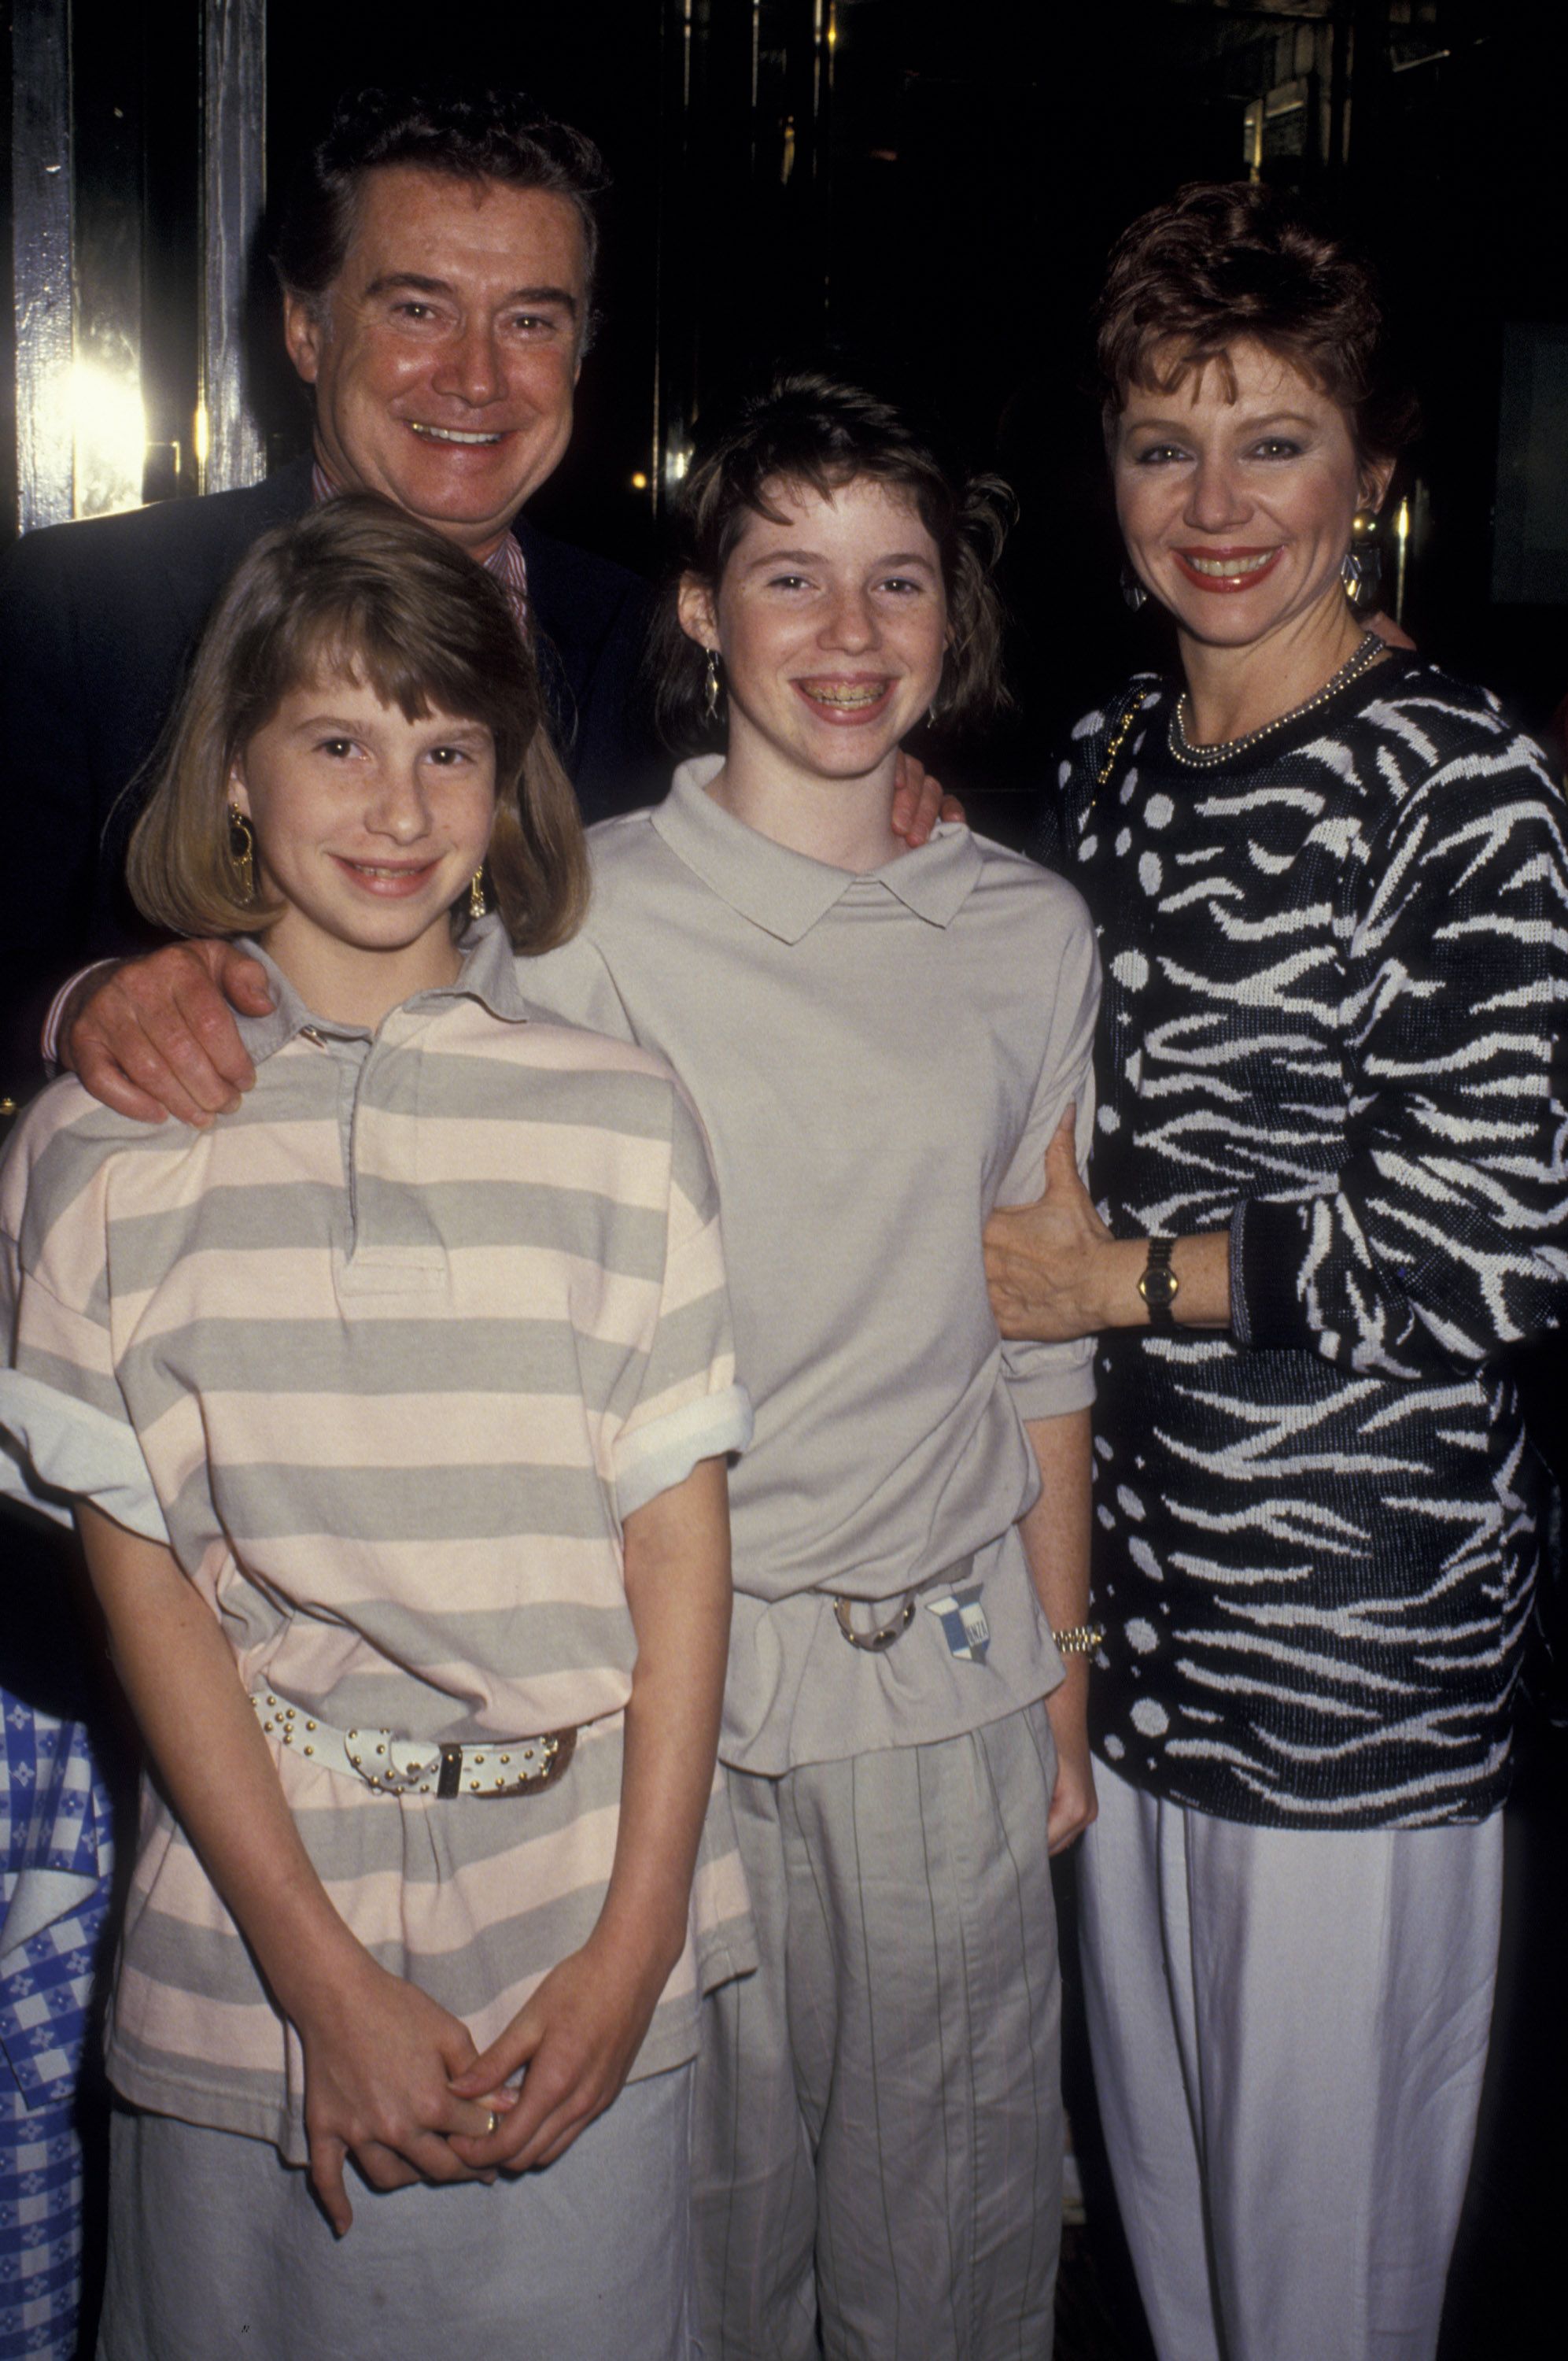 Regis, Joy Philbin, and daughters Joanna and Jennifer Philbin at the premiere party for "The Monster Squad" on June 3, 1987, in New York City. | Source: Ron Galella, Ltd./Ron Galella Collection/Getty Images